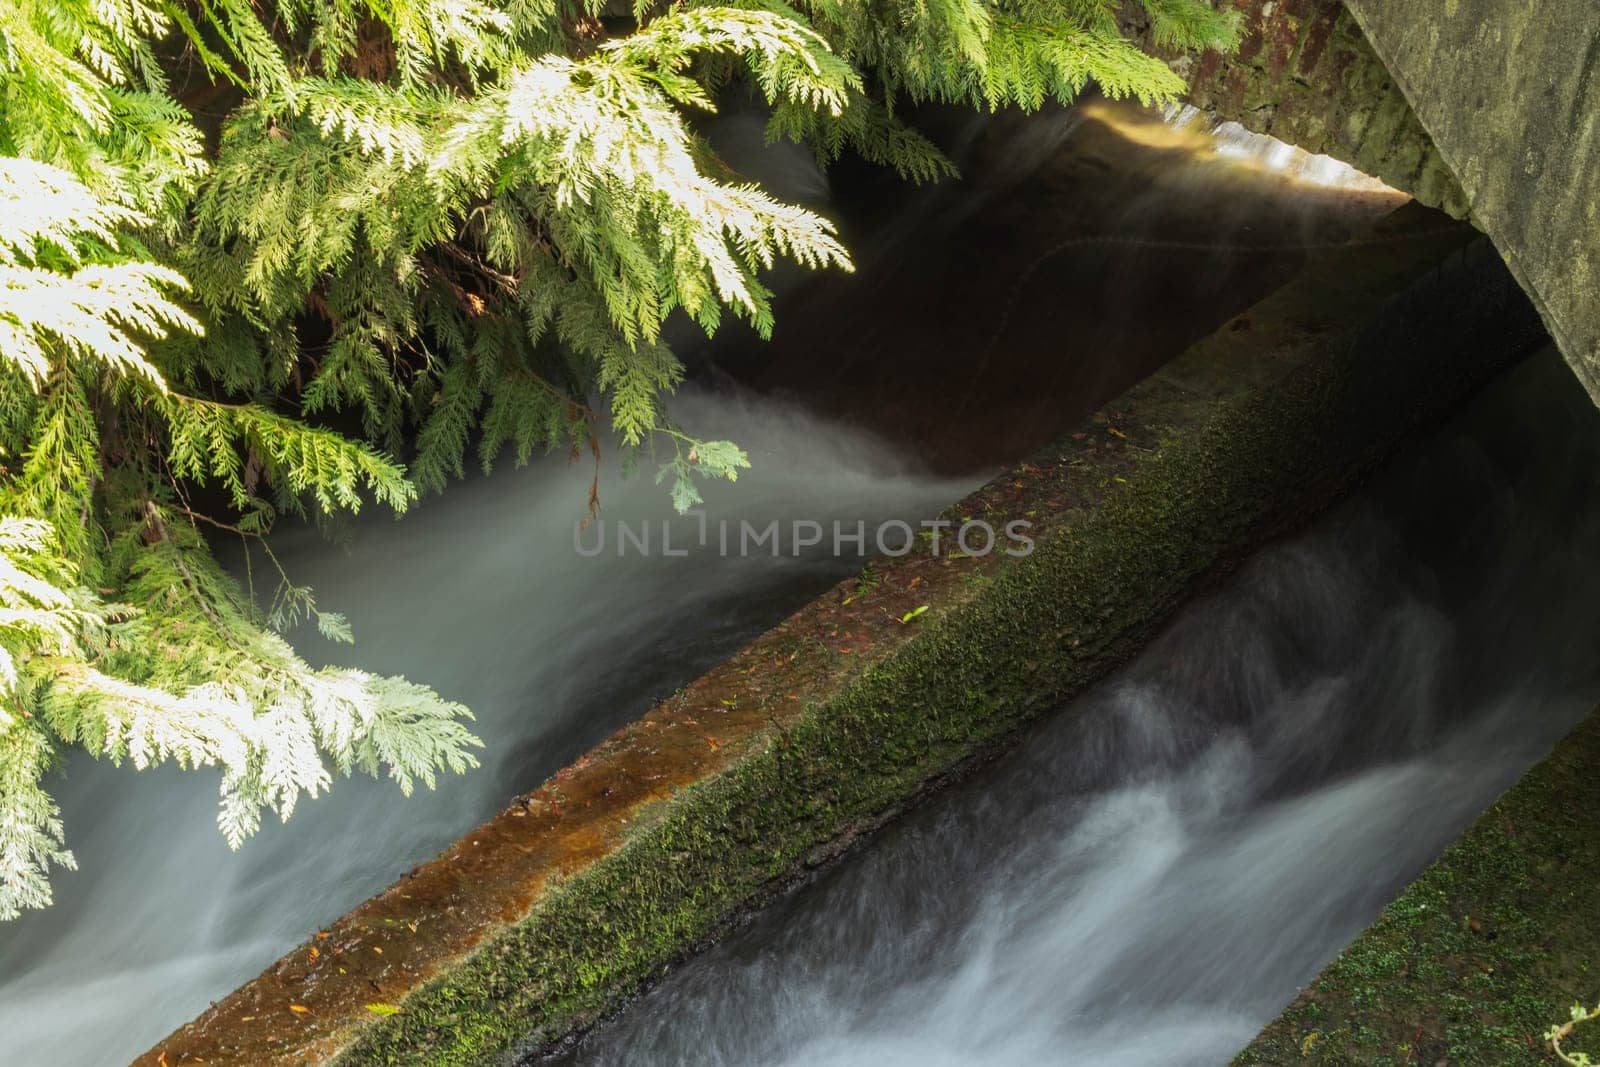 the stream flows through the houses and the park. The water flows quickly. High quality photo